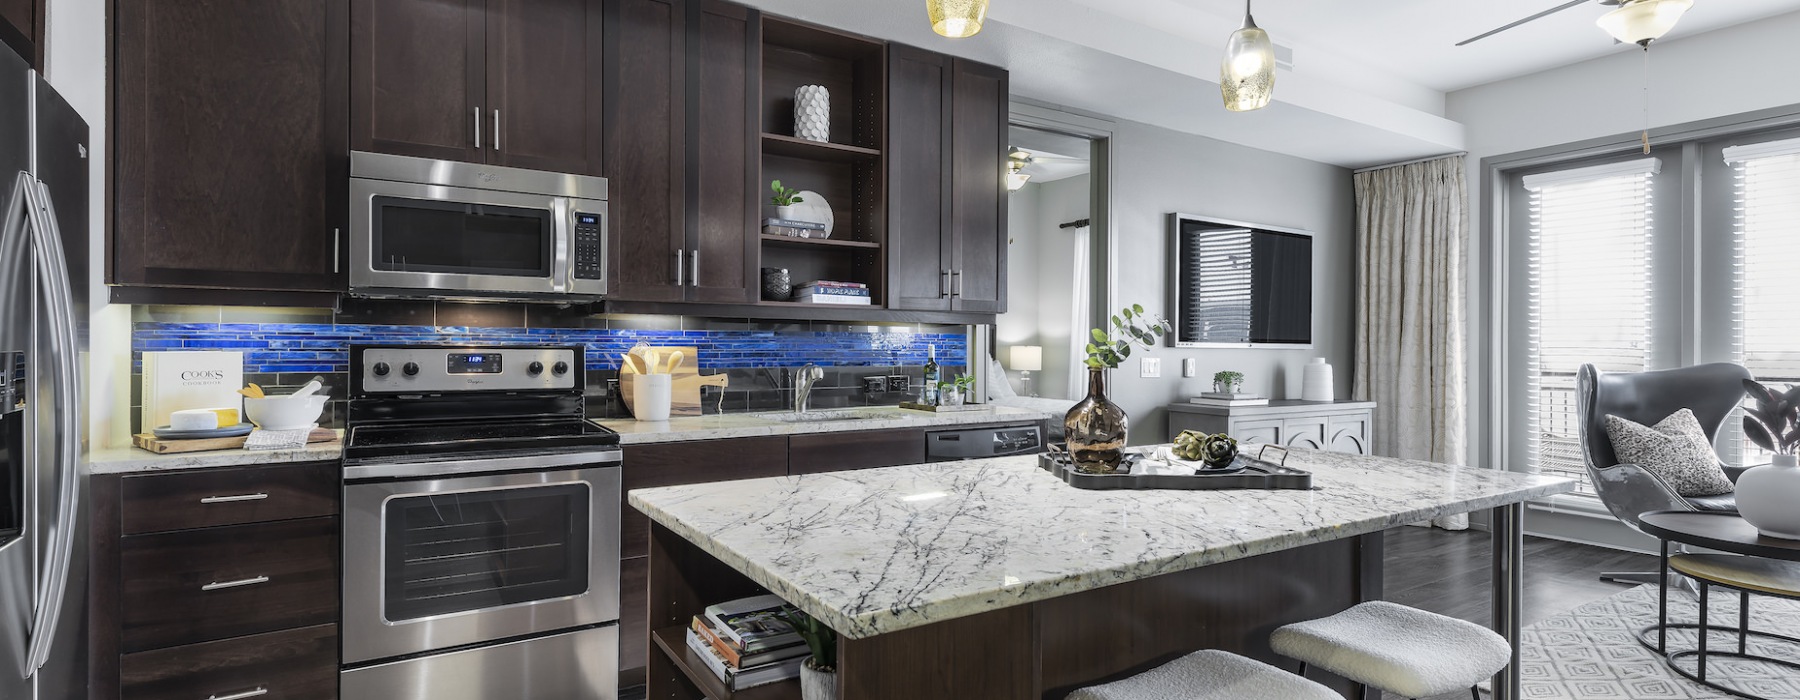 Upscale kitchen at The Kenzie, apartments in North Austin 